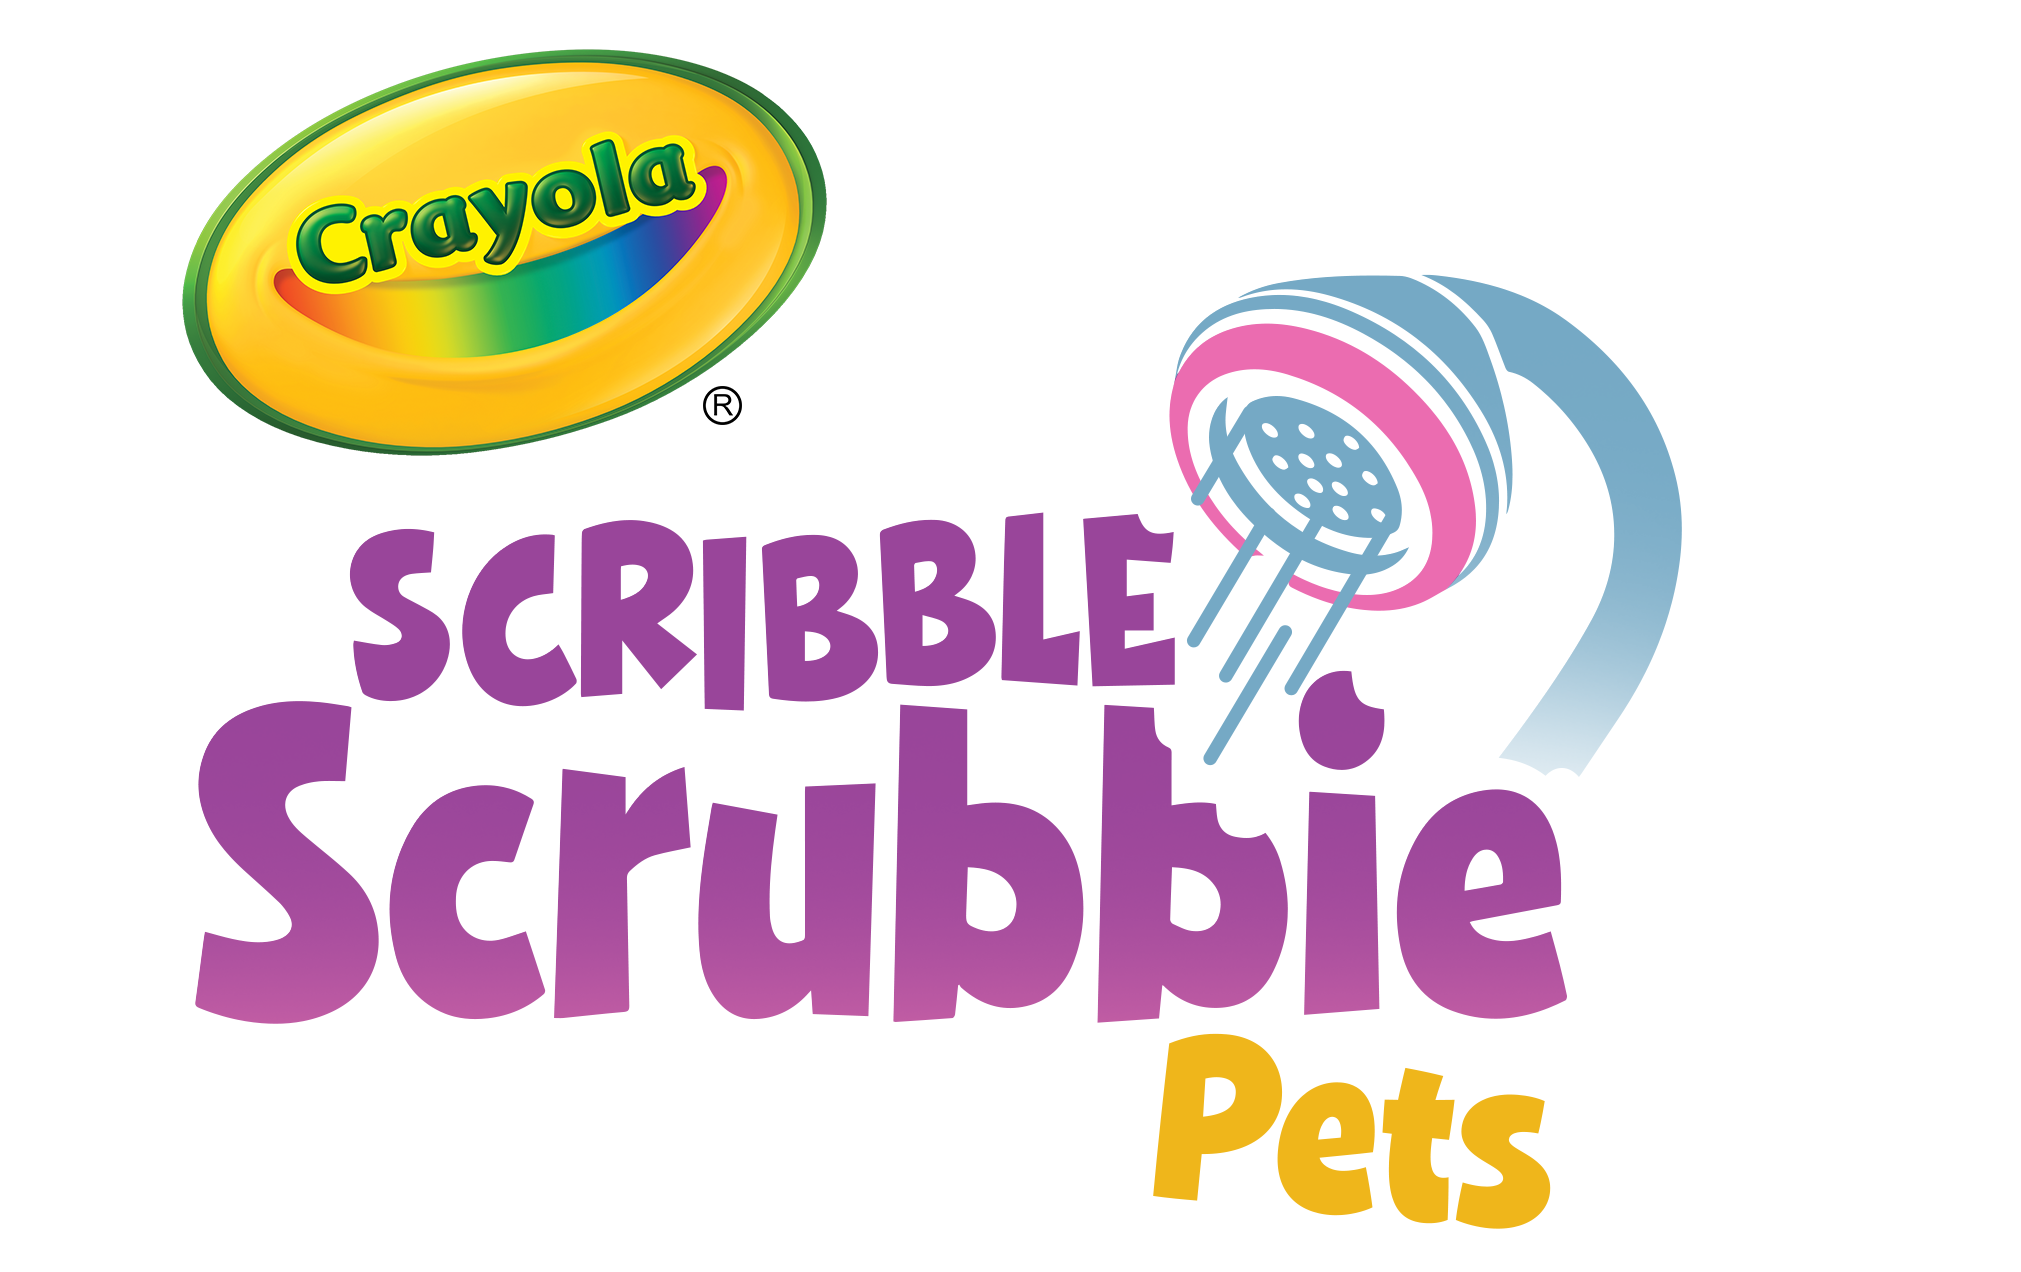 Crayola Scribble Scrubbie Pets  Help Center home page